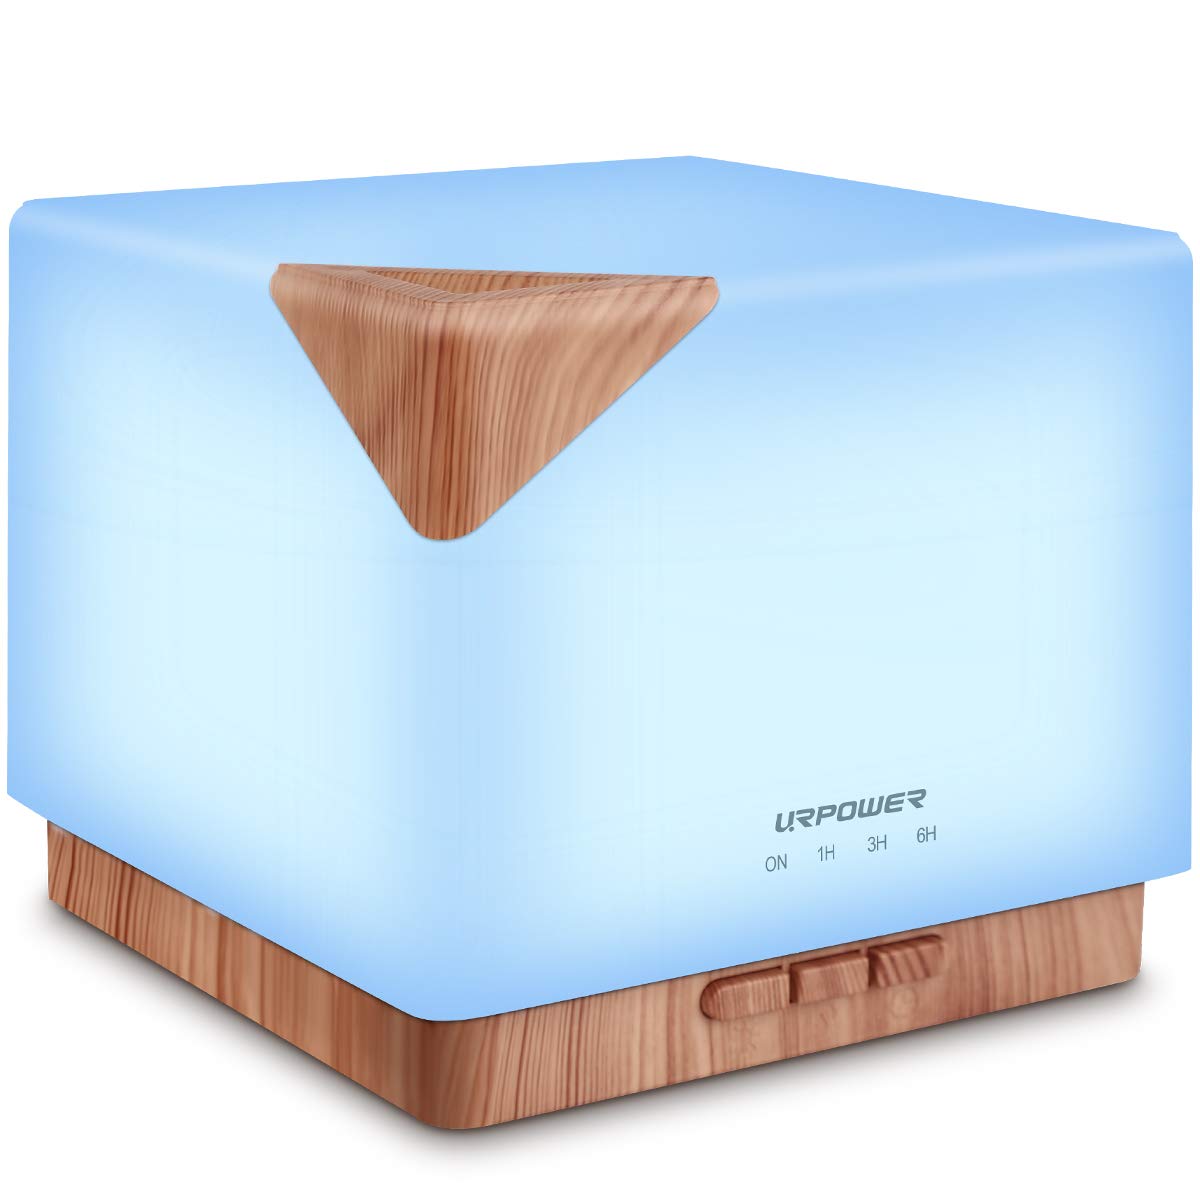 URPOWER Aromatherapy Essential Oil Diffuser Humidifier, 700ml Large Capacity Modern Ultrasonic Aroma Diffusers Running 20+ Hours with Adjustable Mist Mode/4 Timer Settings for Home Office Study